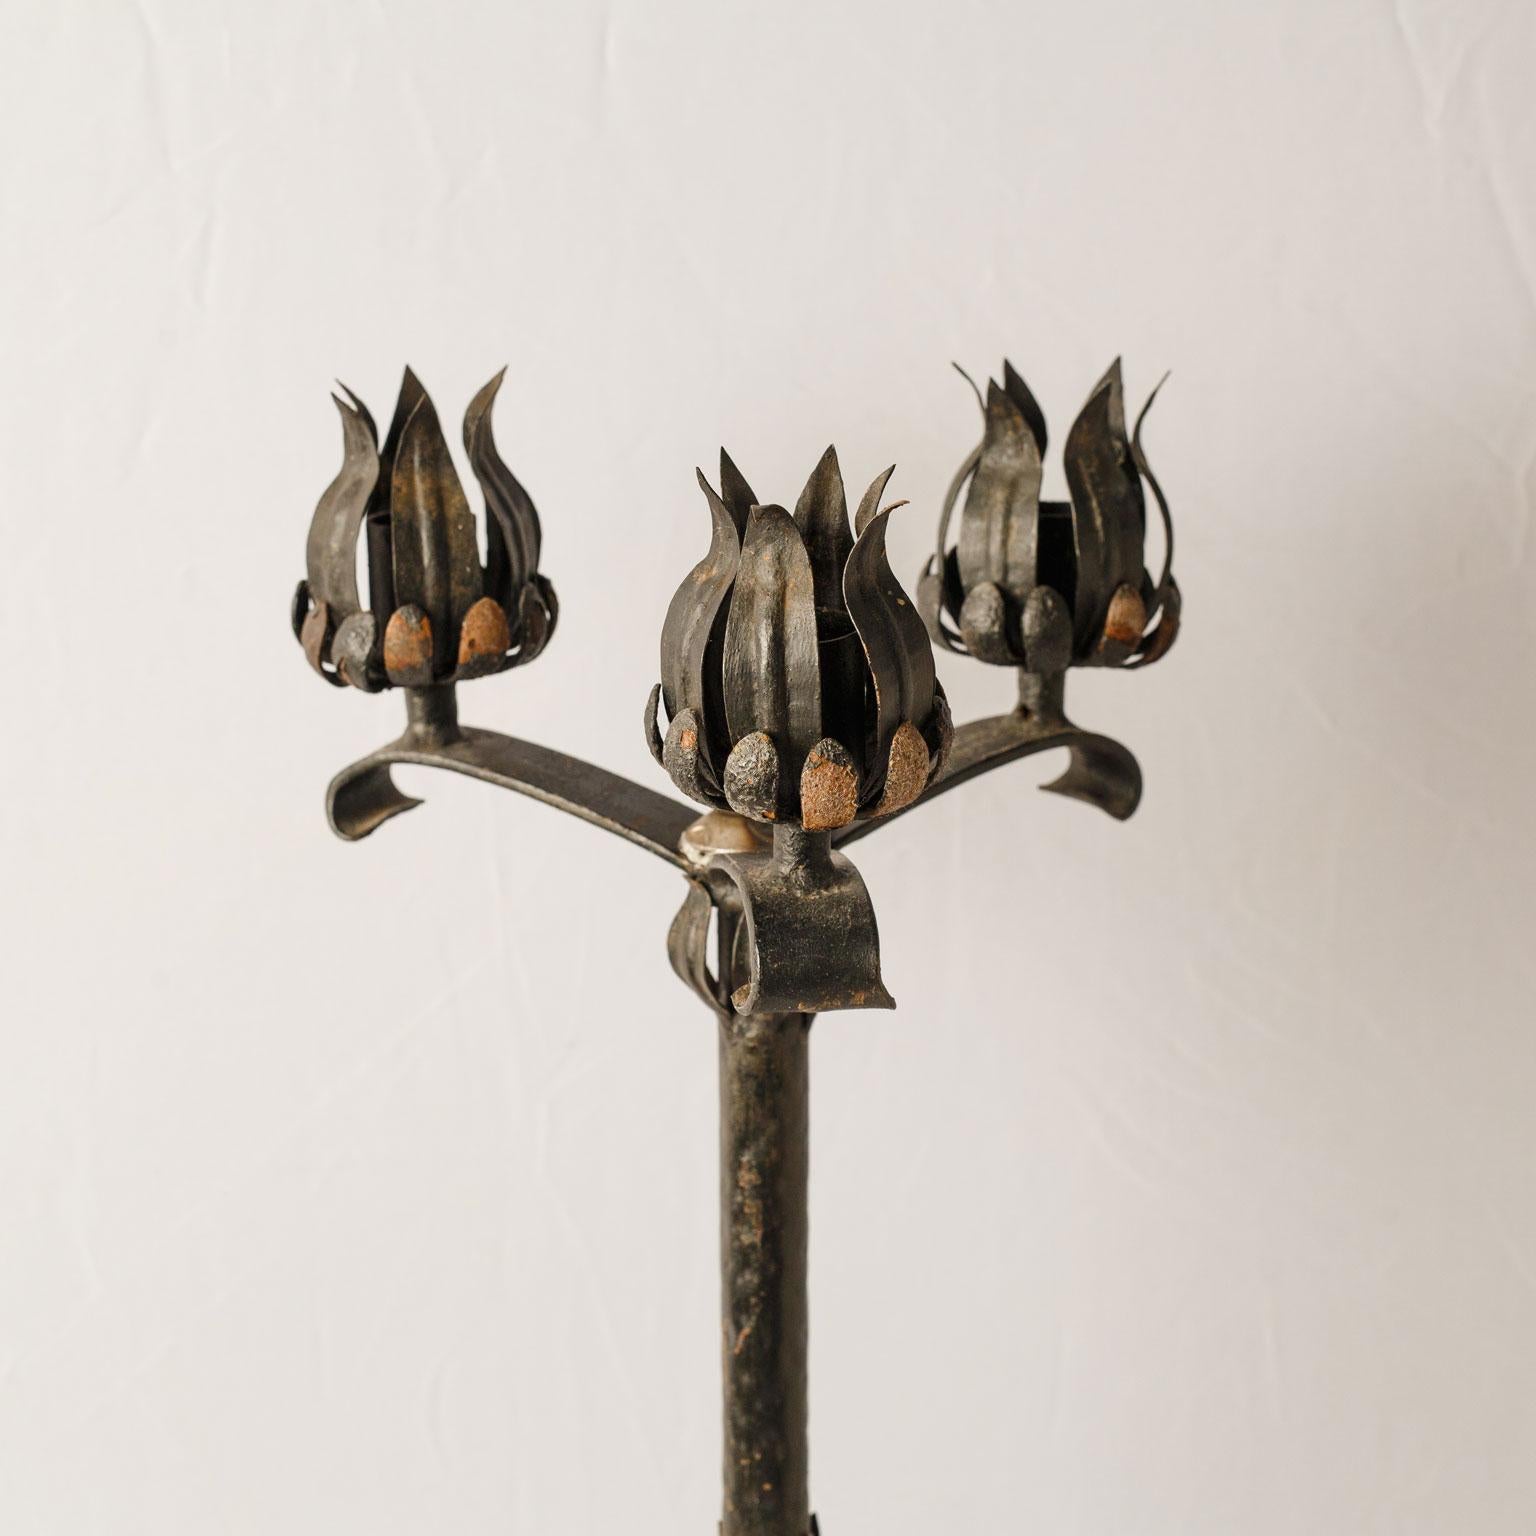 Wrought iron candelabra with three candleholders. Hand forged, solid with nice heavy weight. Currently unwired, but can be wired as a custom floor lamp for an additional cost.